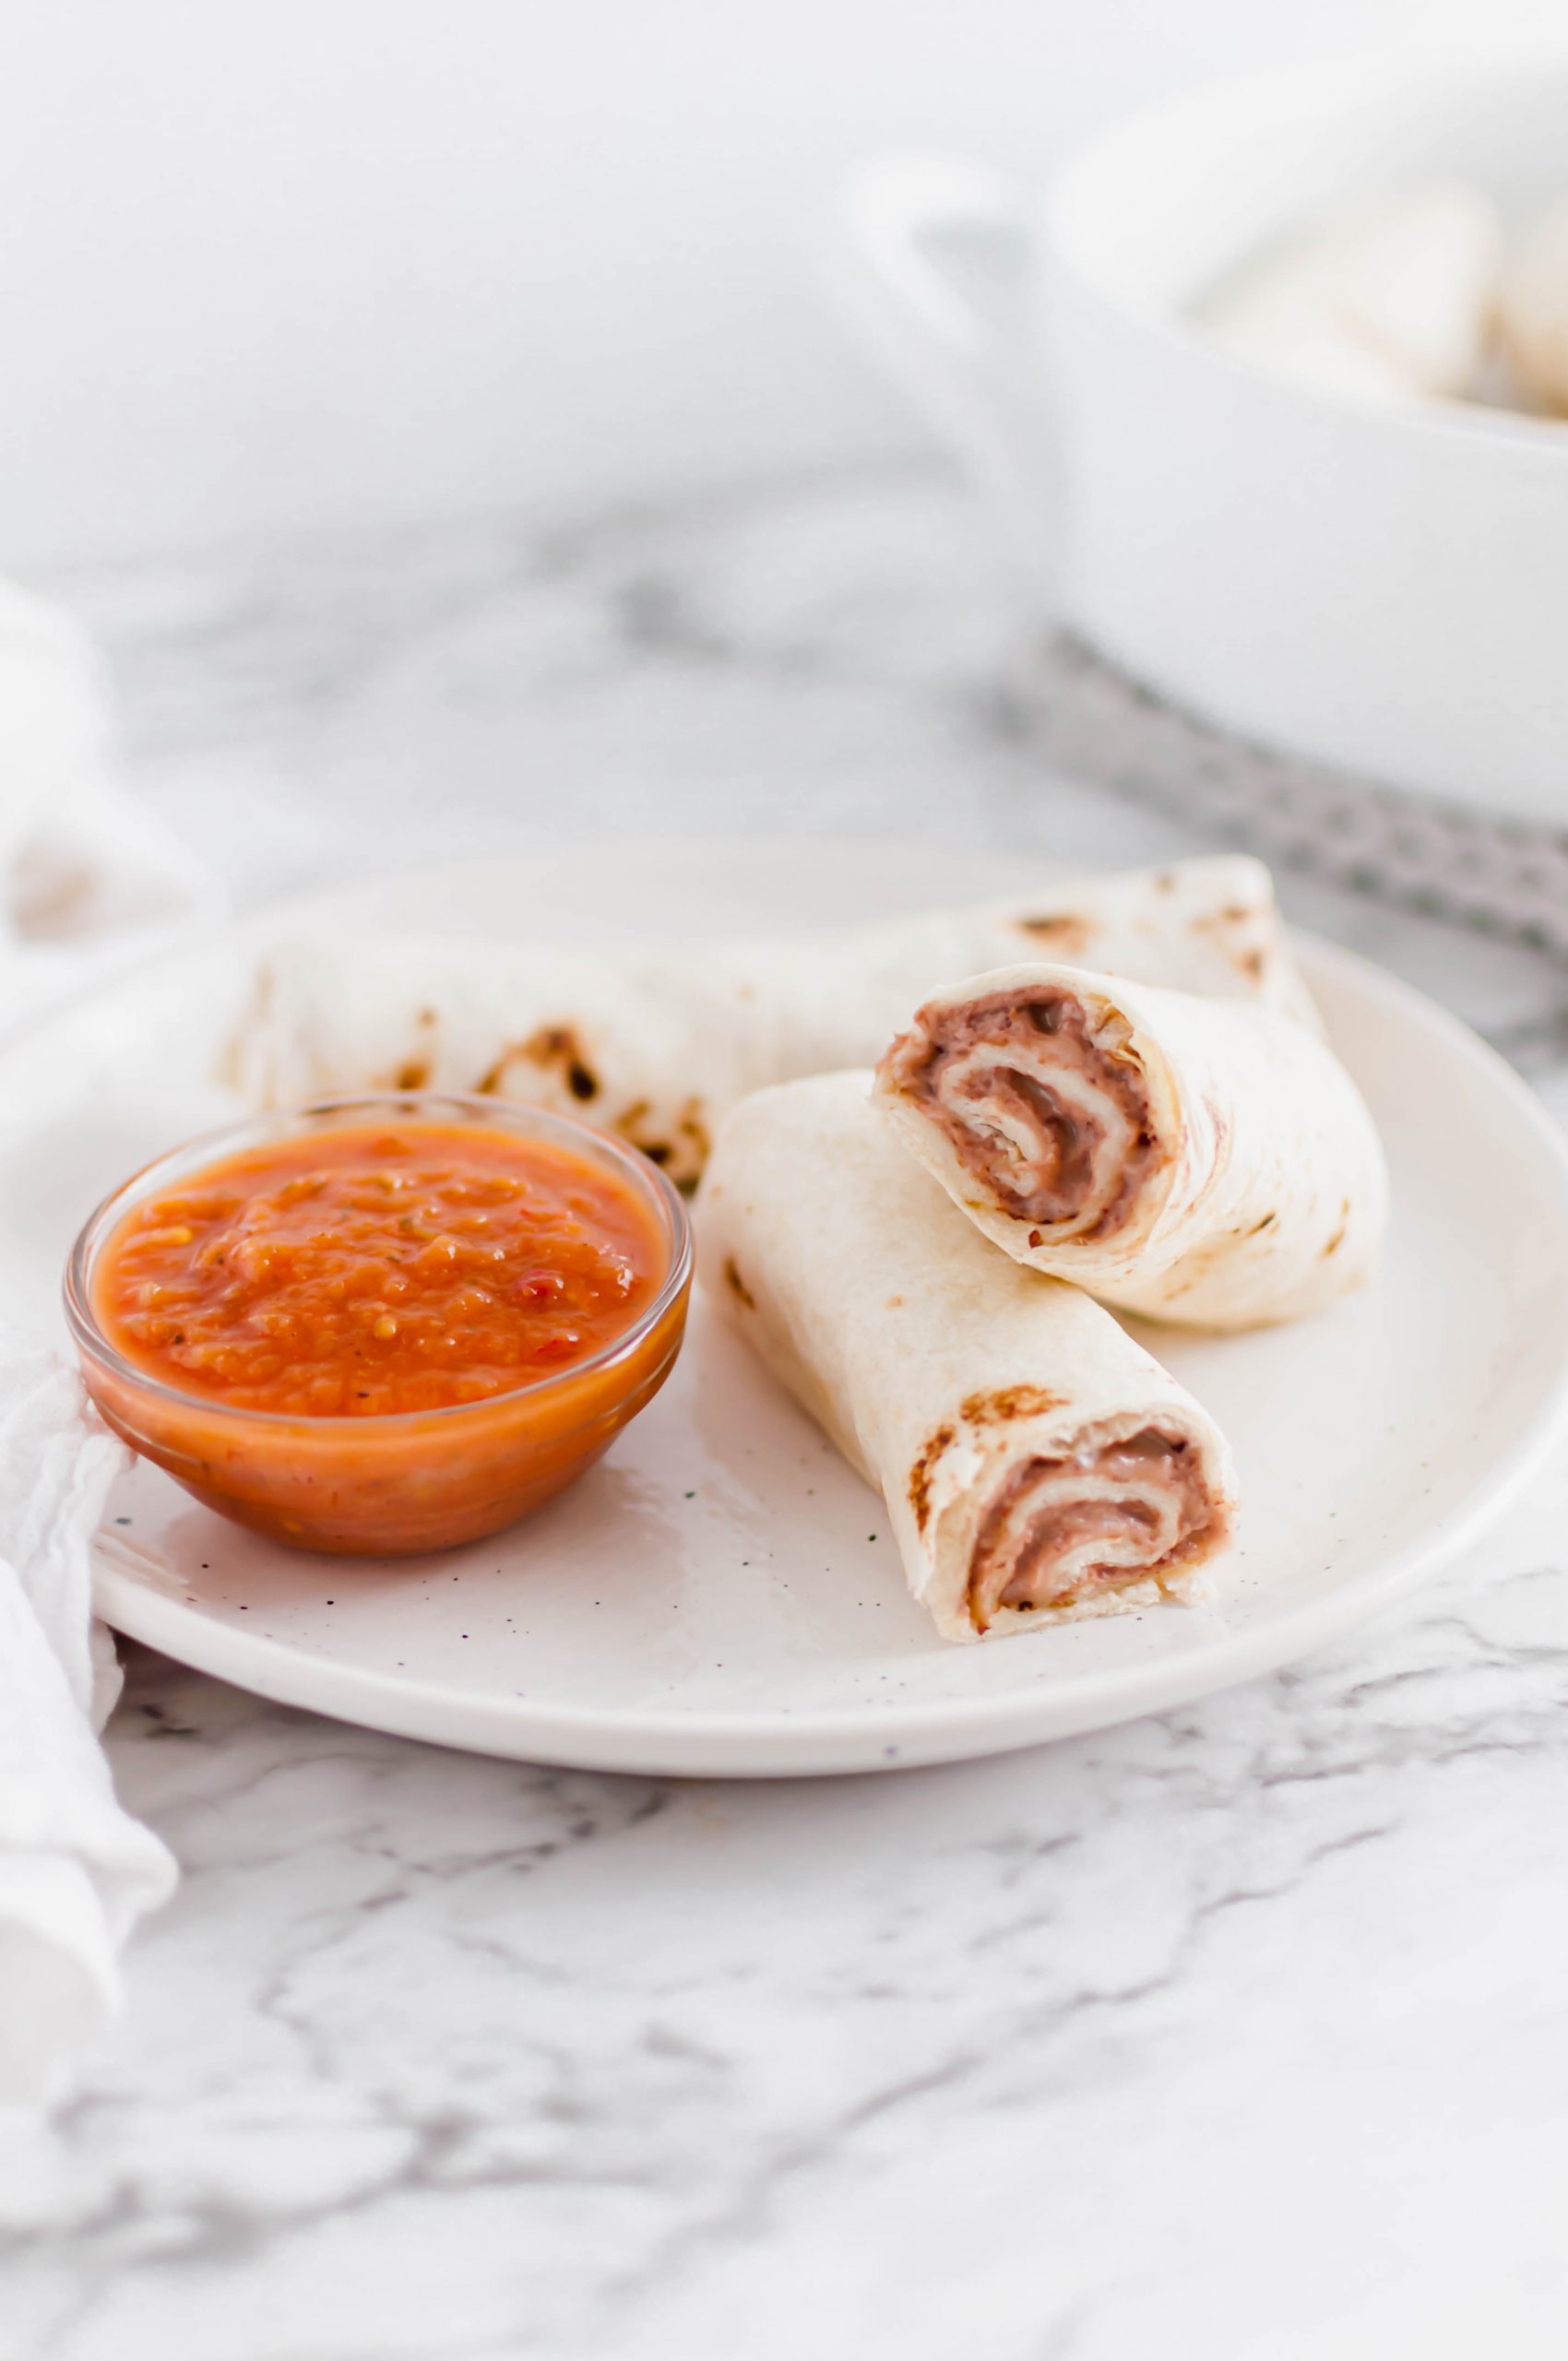 These Bean and Cheese Burritos are a great meal prep or easy dinner option. Freezer friendly with directions included.